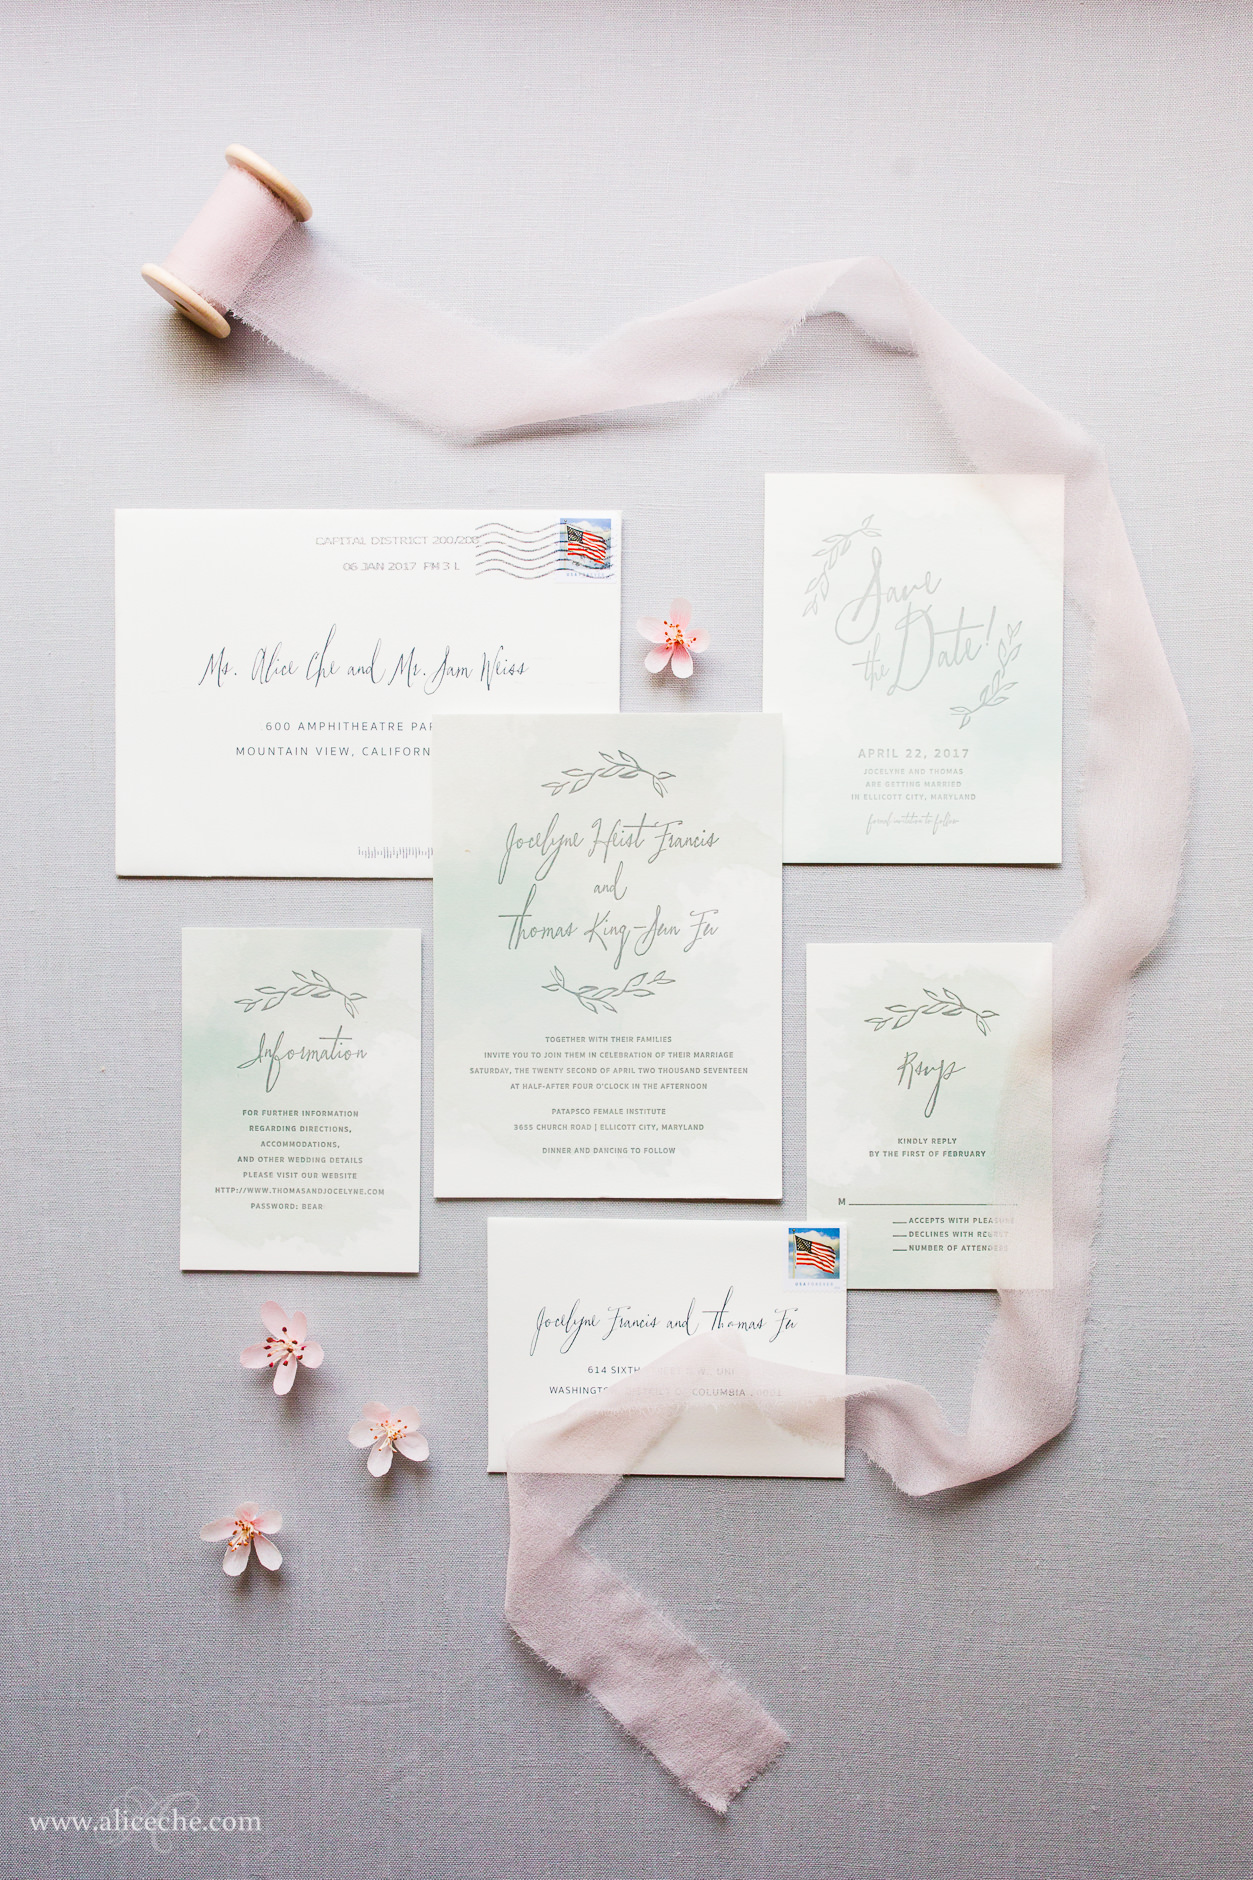 Watercolor wedding invitation styled with silk ribbon and crepe paper cherry blossoms